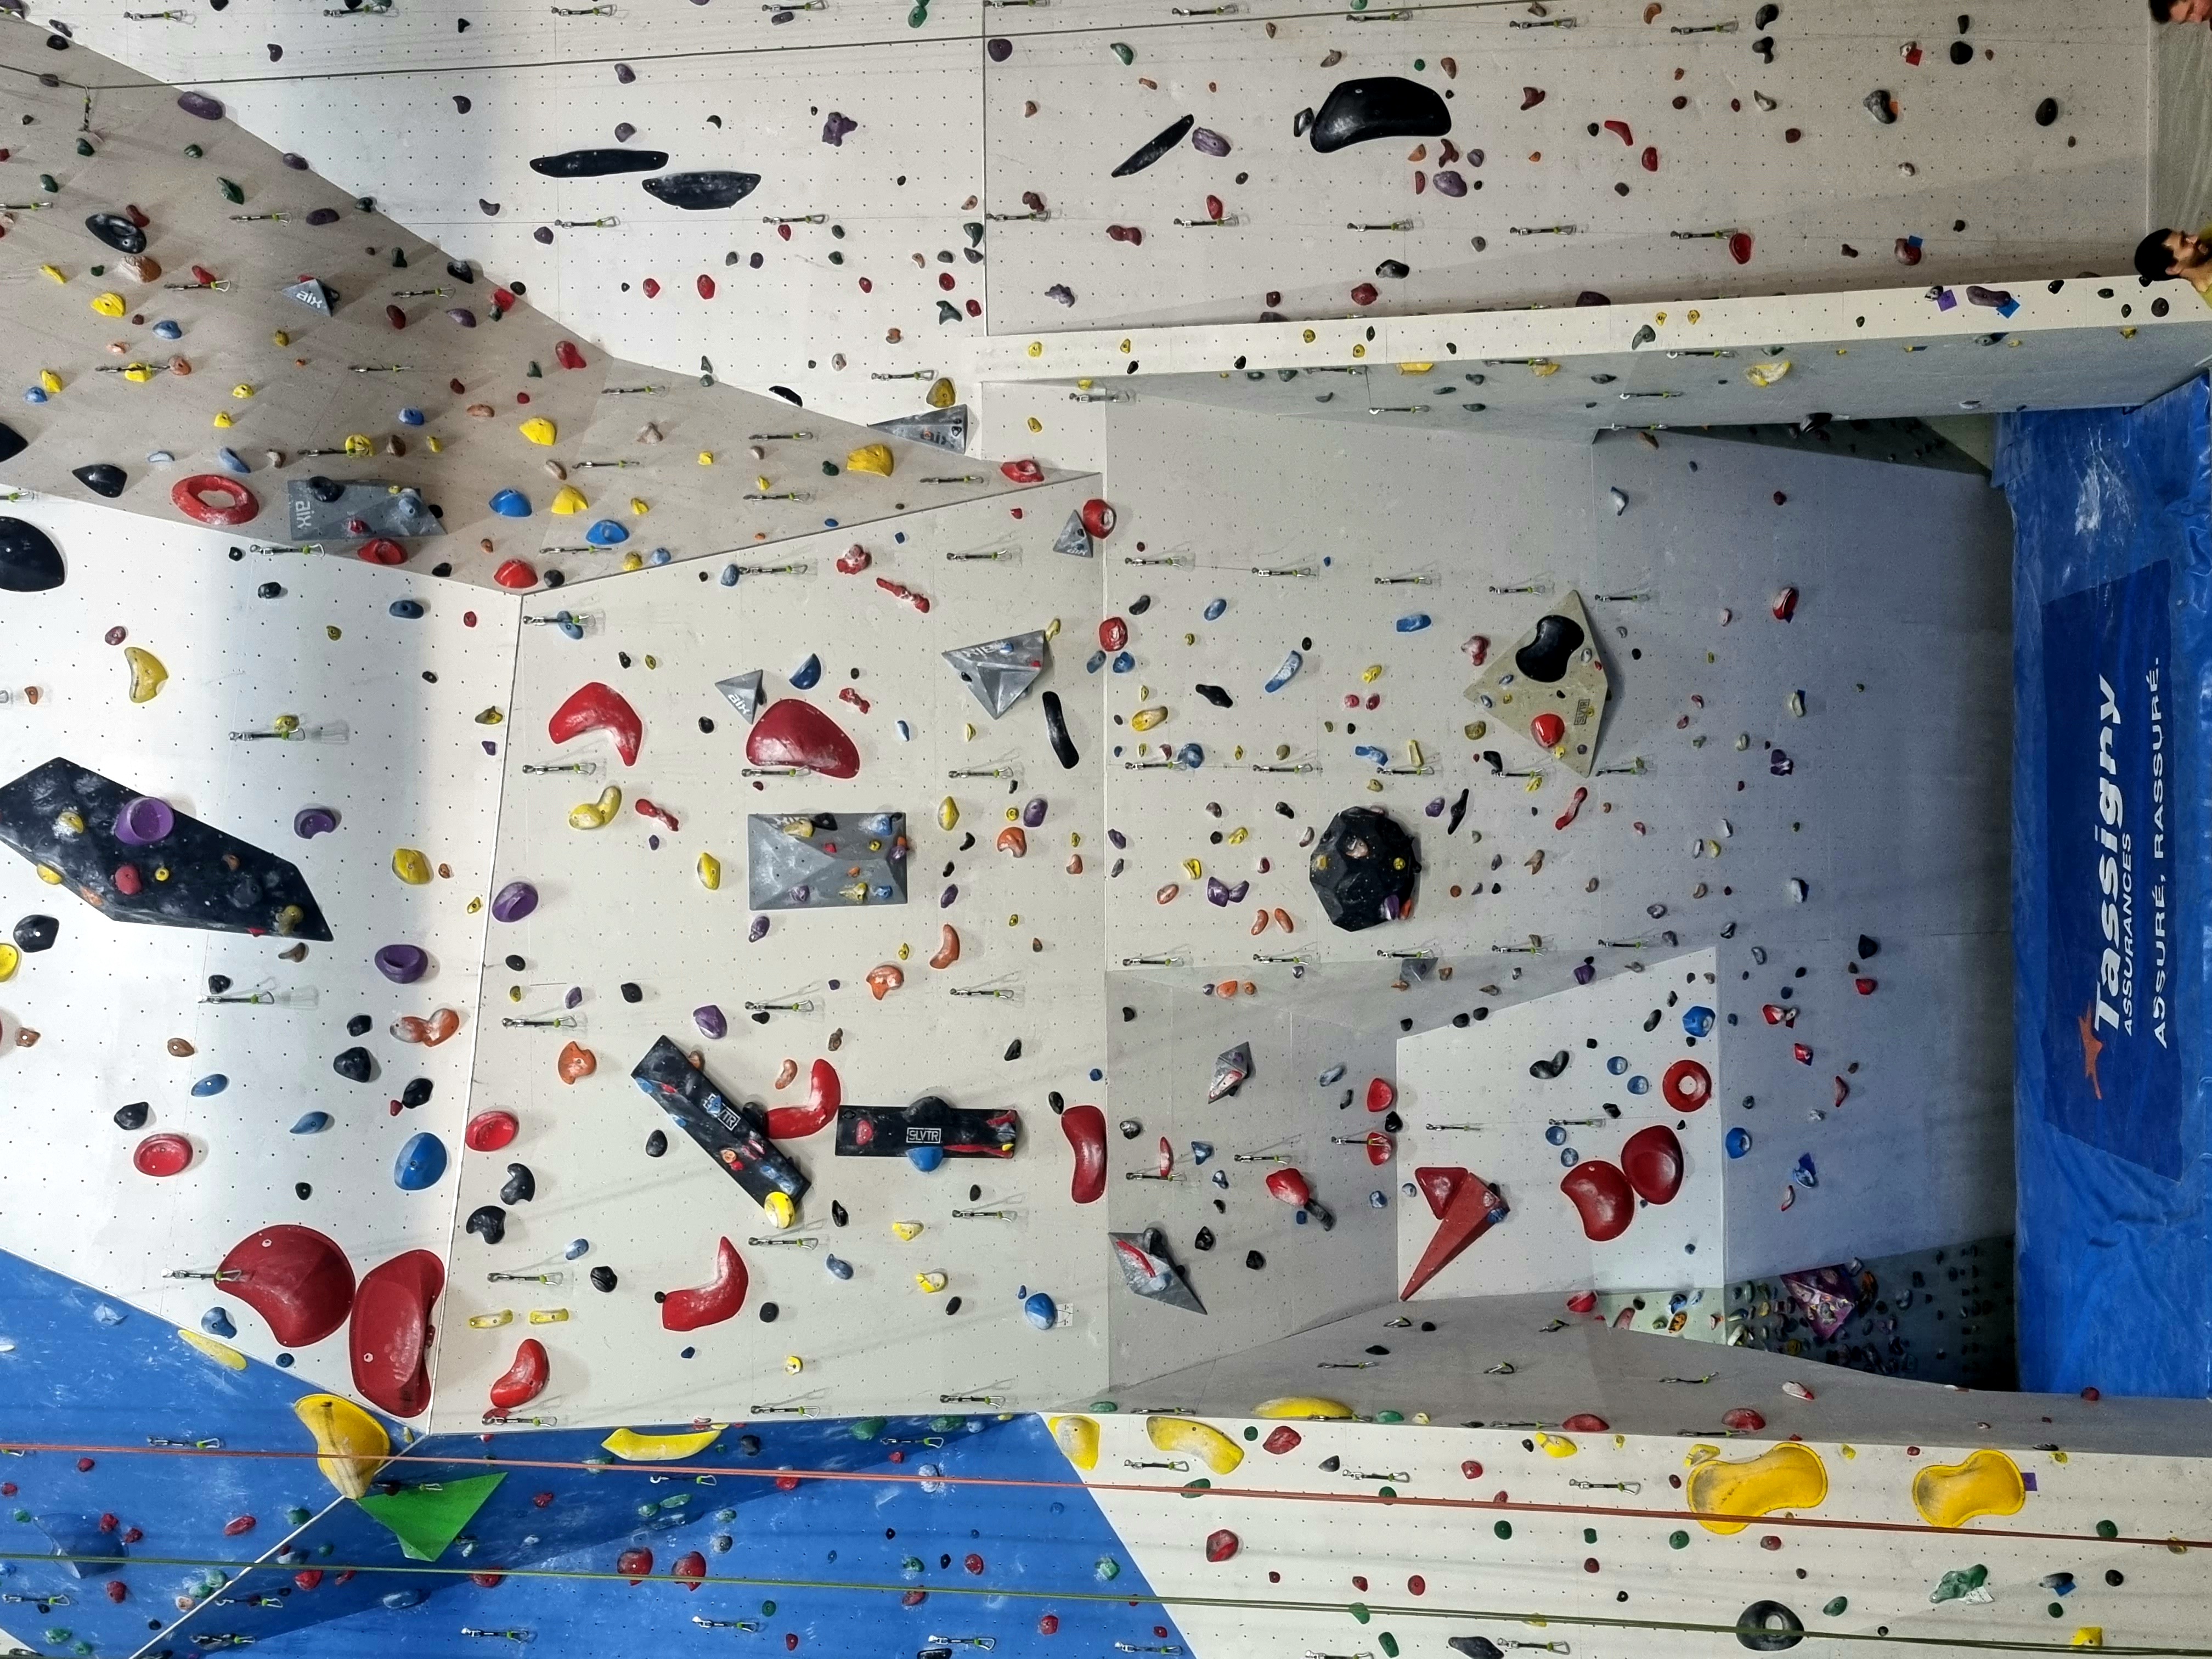 Indoor climbing equipment for beginners and advanced climbers! At CCS!